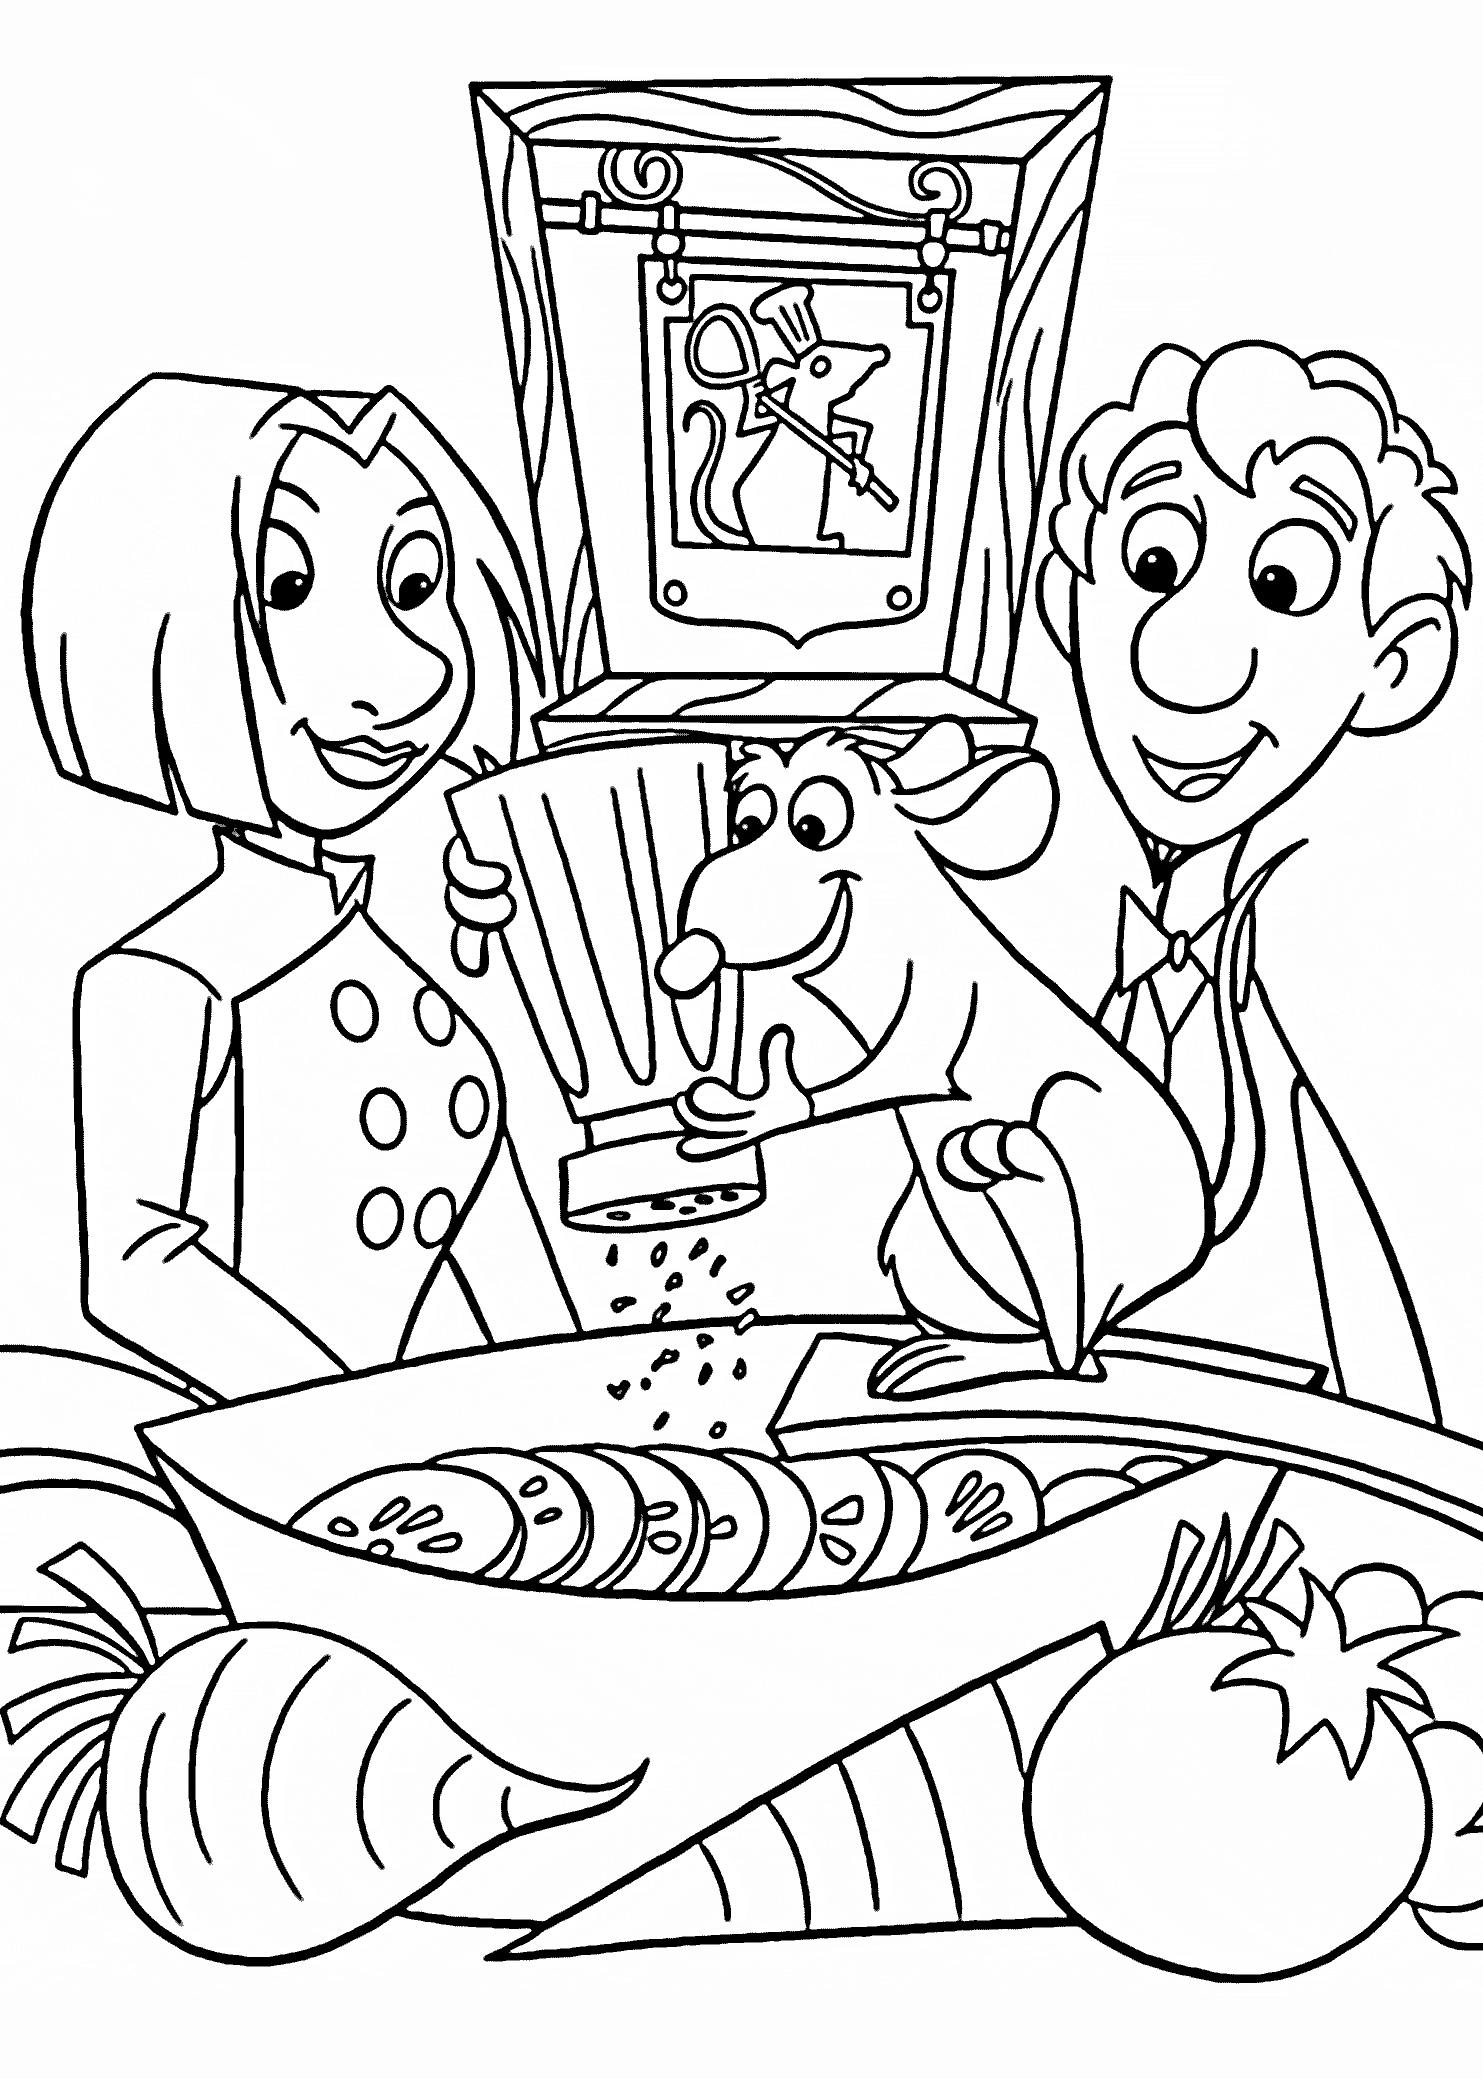 Ratatouille cooking coloring pages for kids printable free cartoon coloring pages disney coloring pages coloring book art